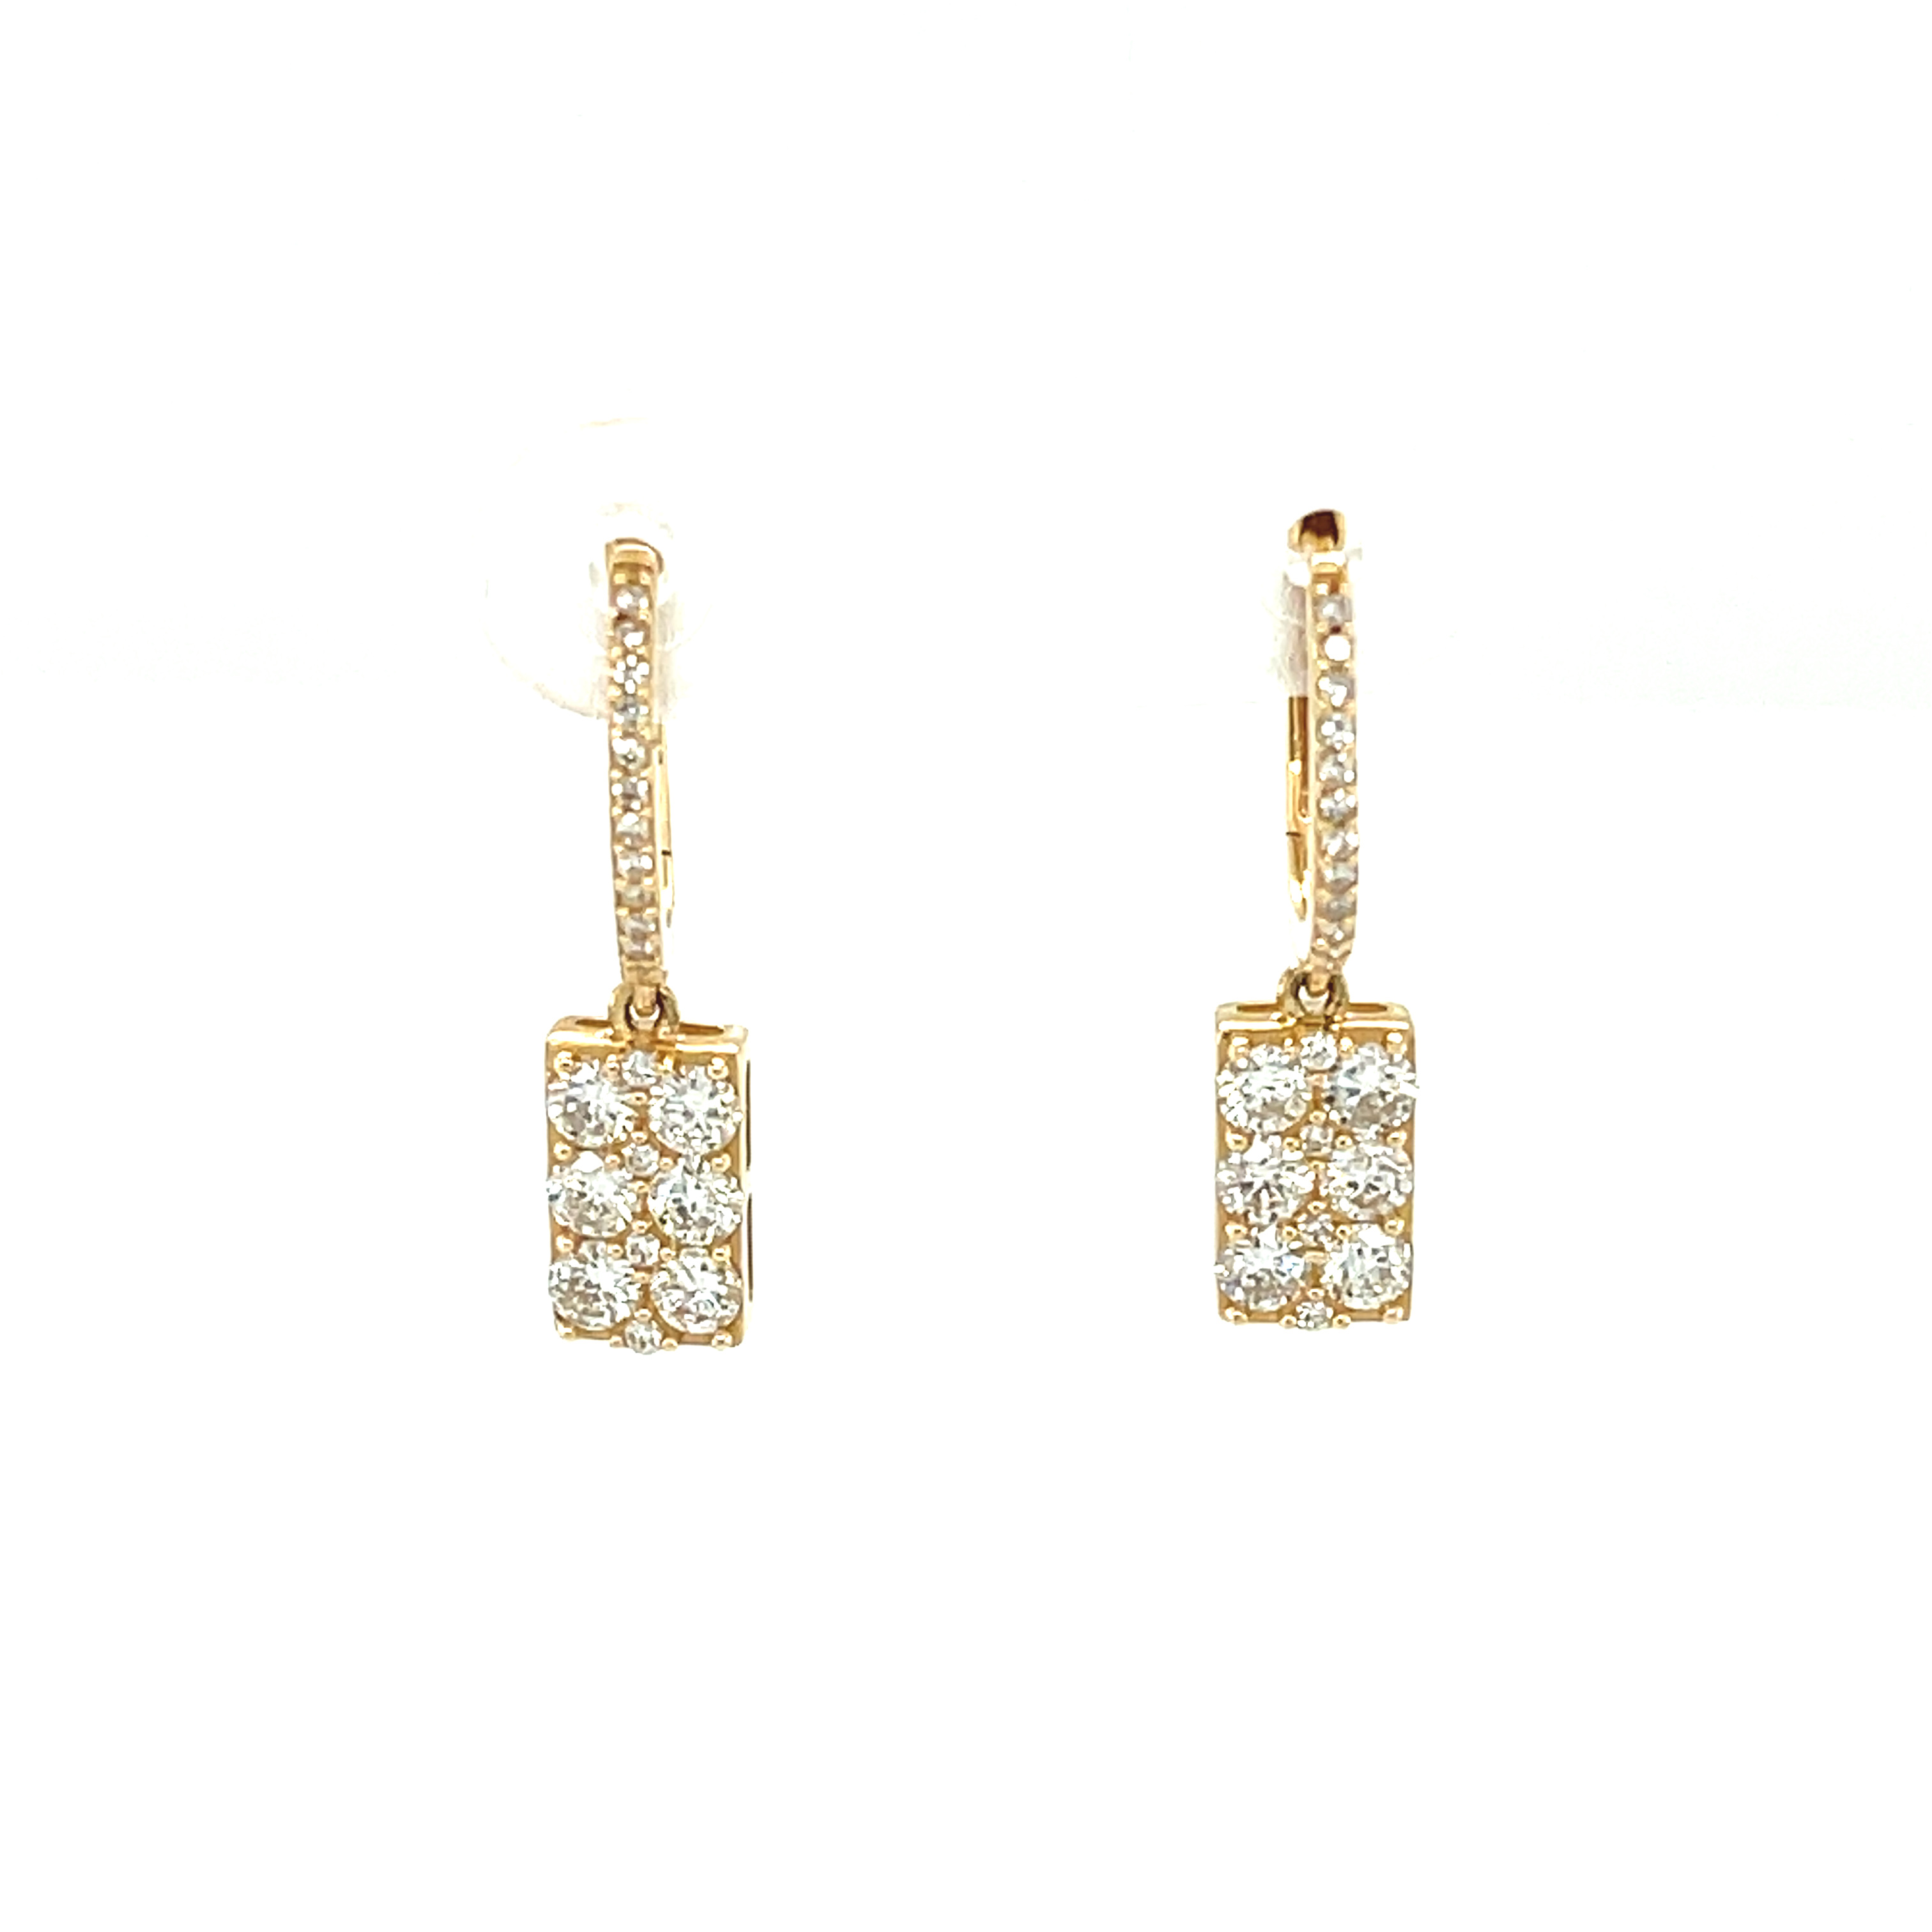 Featured image for “Diamond Dog Tag Earrings”